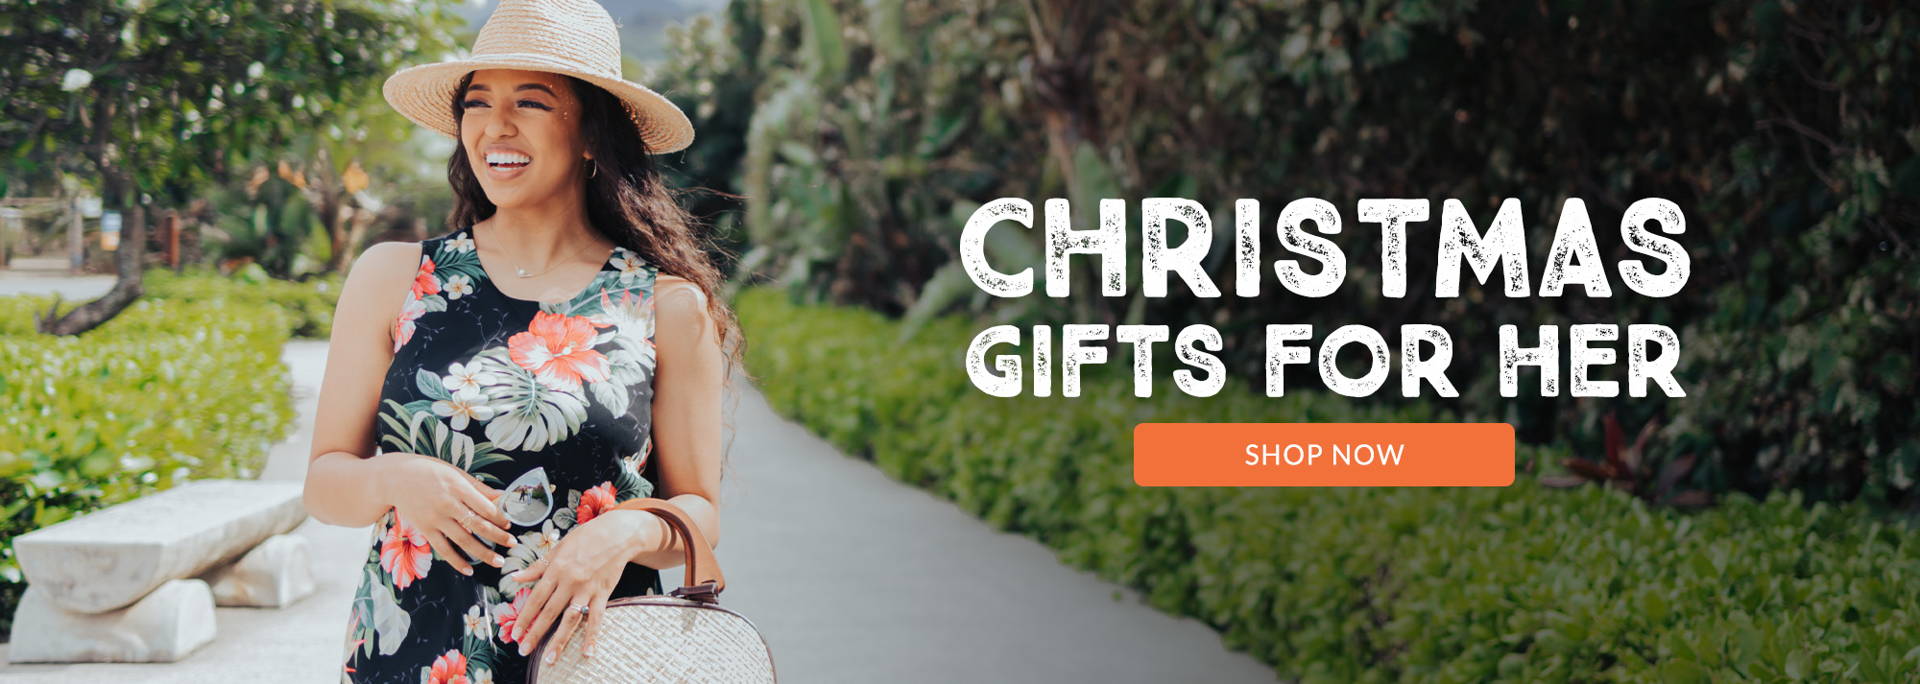 Perfect presents incoming we have all she dreams of. Christmas gifts for her - The Hawaii Store